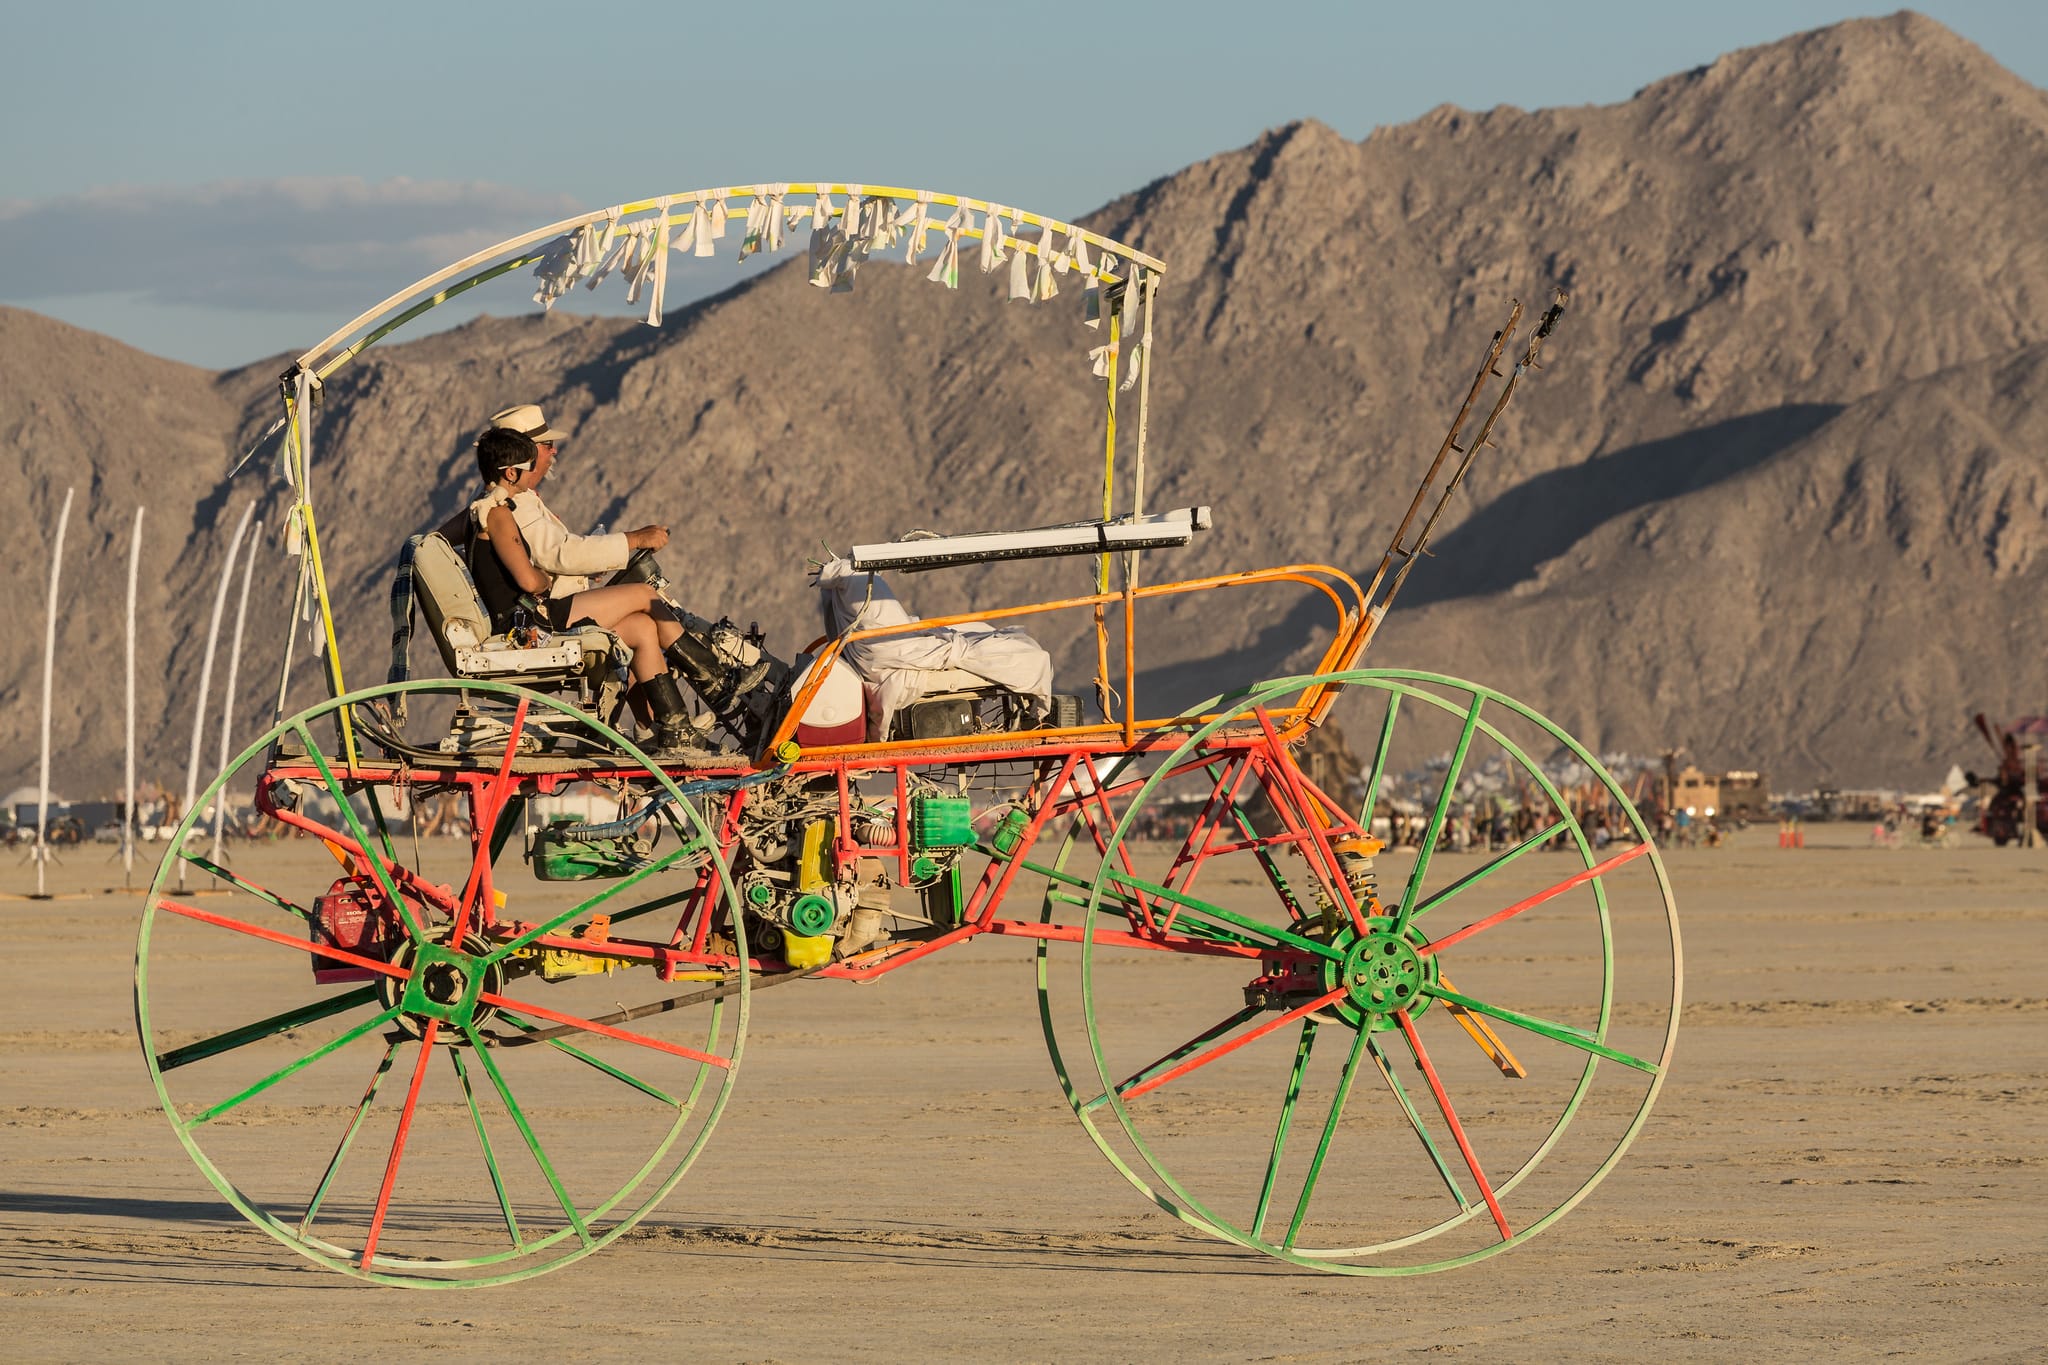 Traveling in USA: the Burning Man Festival in Nevada